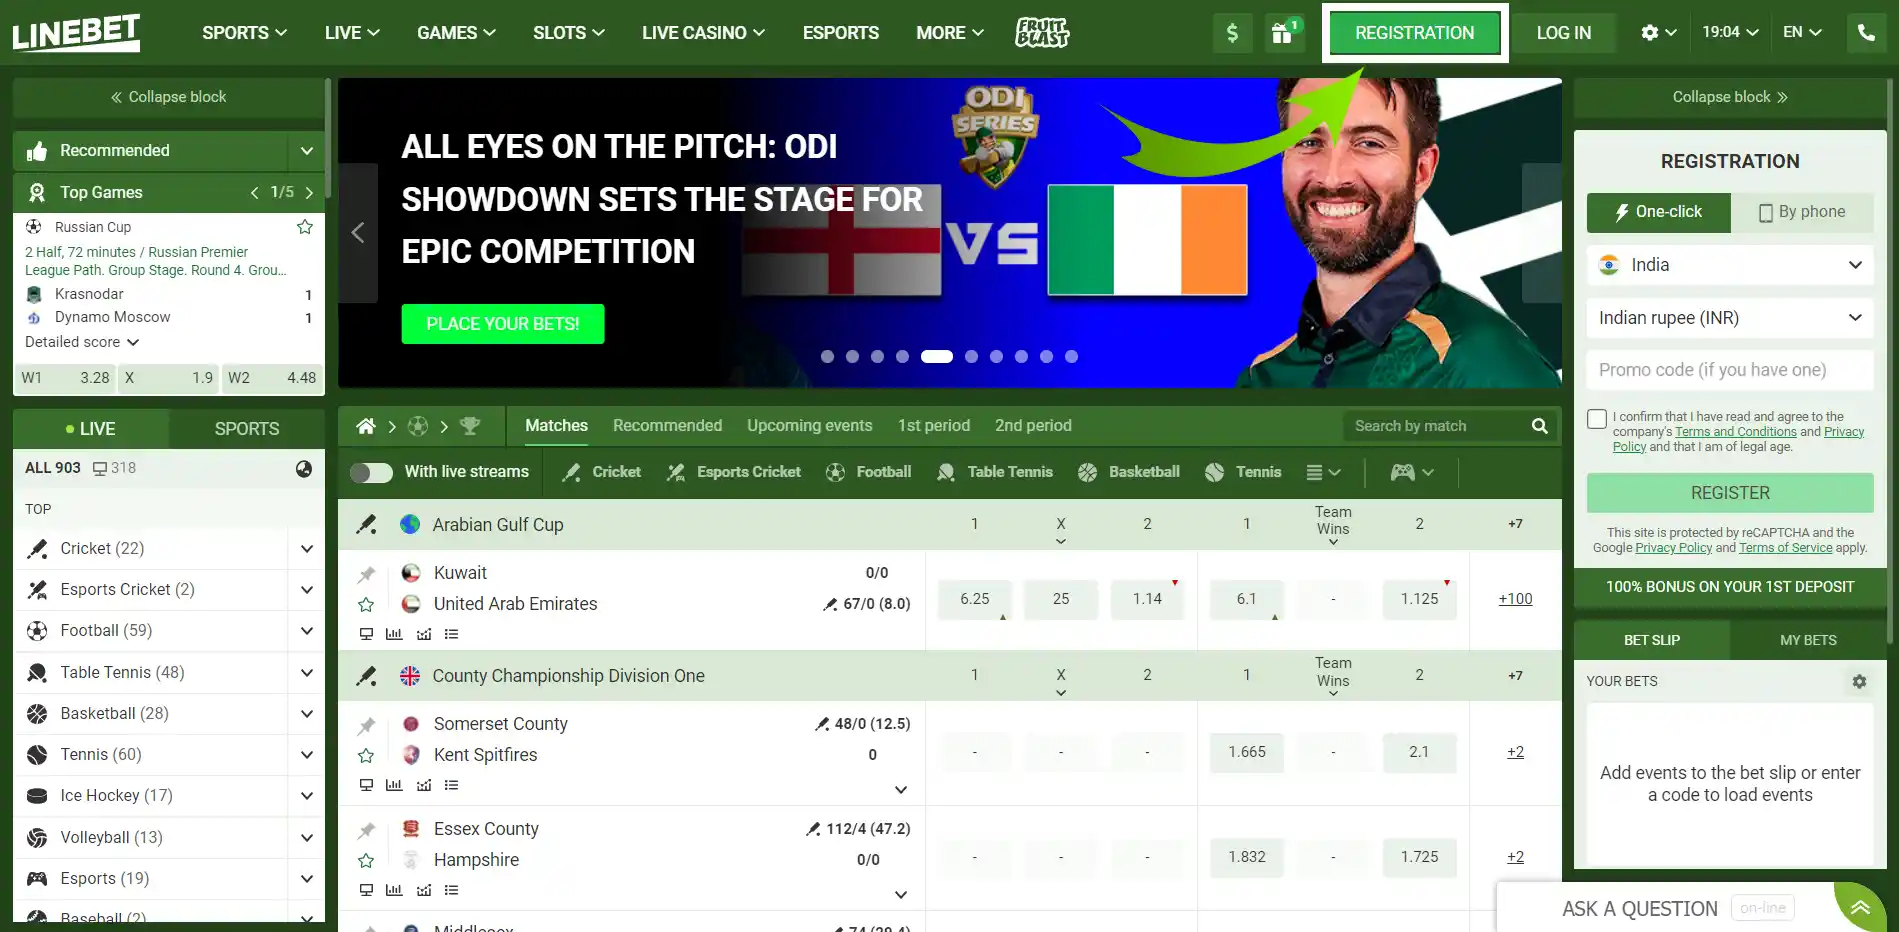 Choose the registration method on Linebet website and create an account.